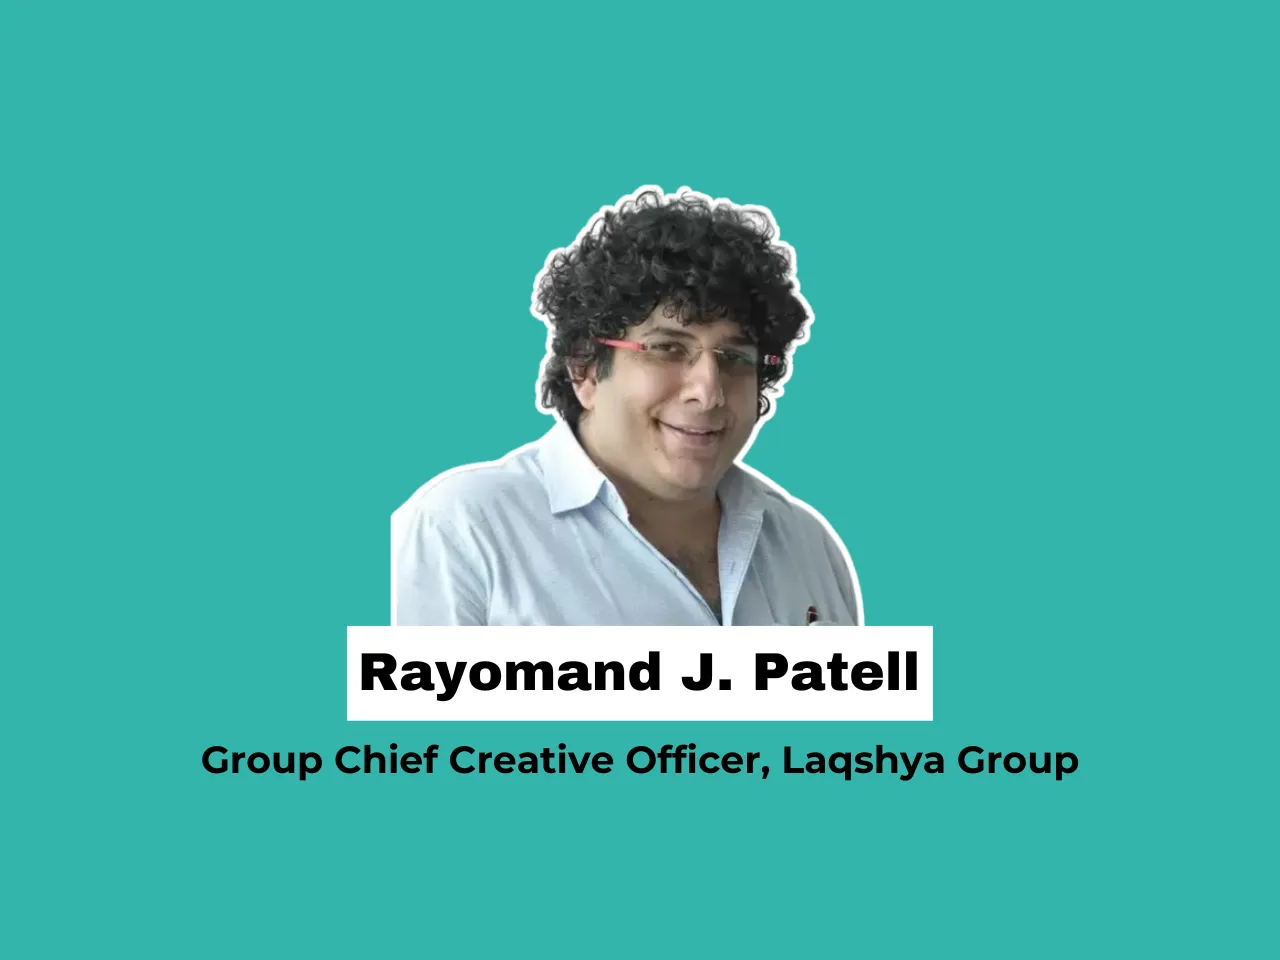 Rayomand J. Patell joins Laqshya Group as Group Chief Creative Officer